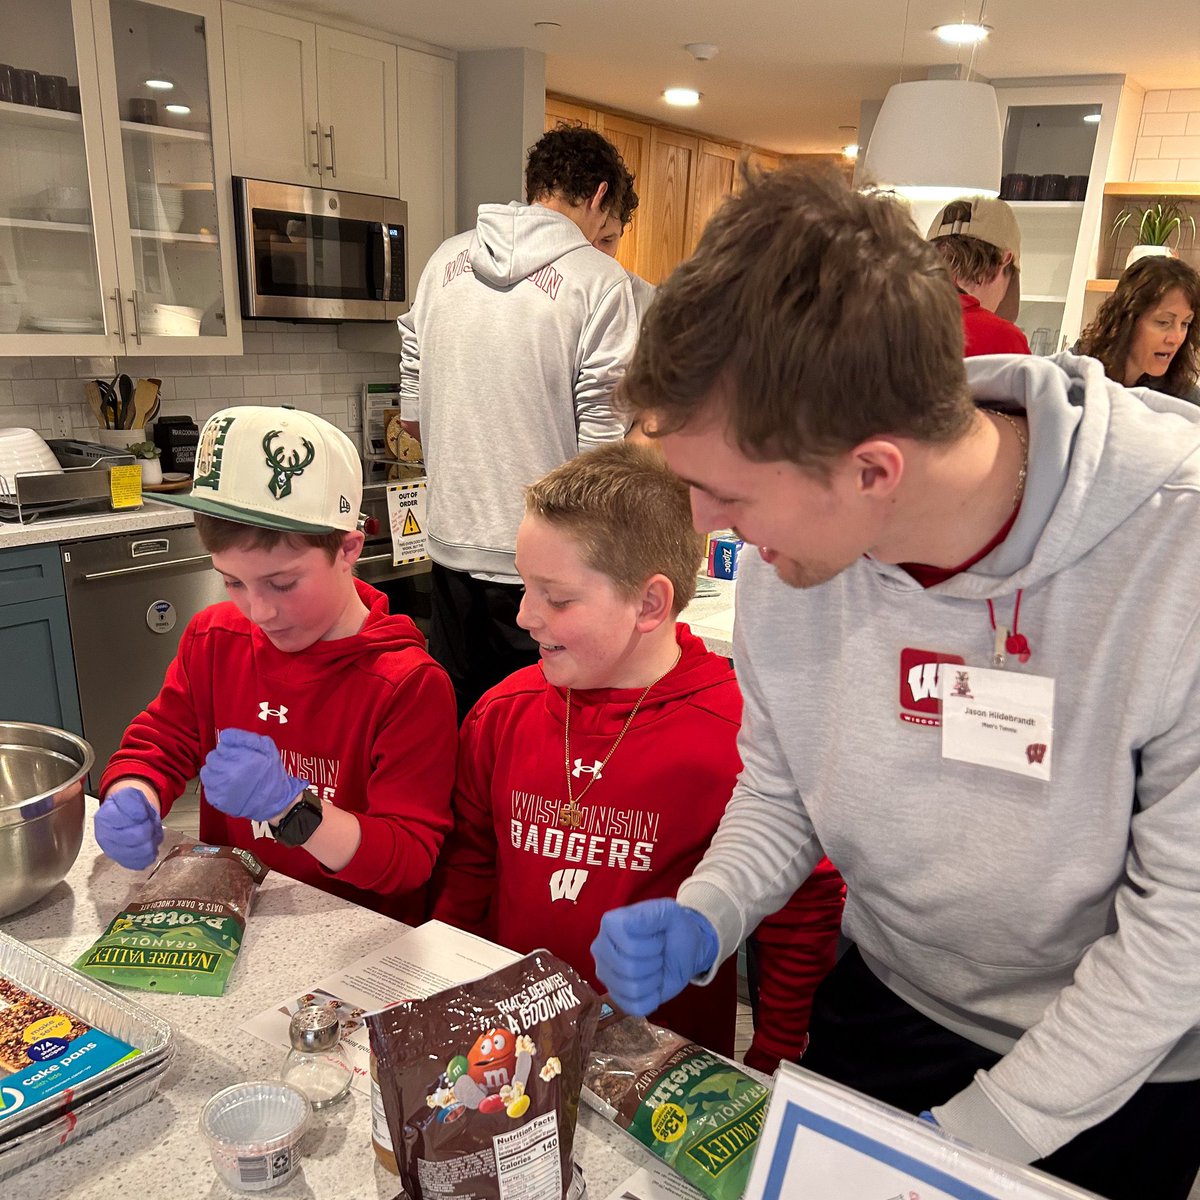 There's nothing like giving back 😊 We had such an amazing time volunteering at the Ronald McDonald House this past weekend to prepare home-cooked meals. @UWBadgers || @rmhcmadison #OnWisconsin